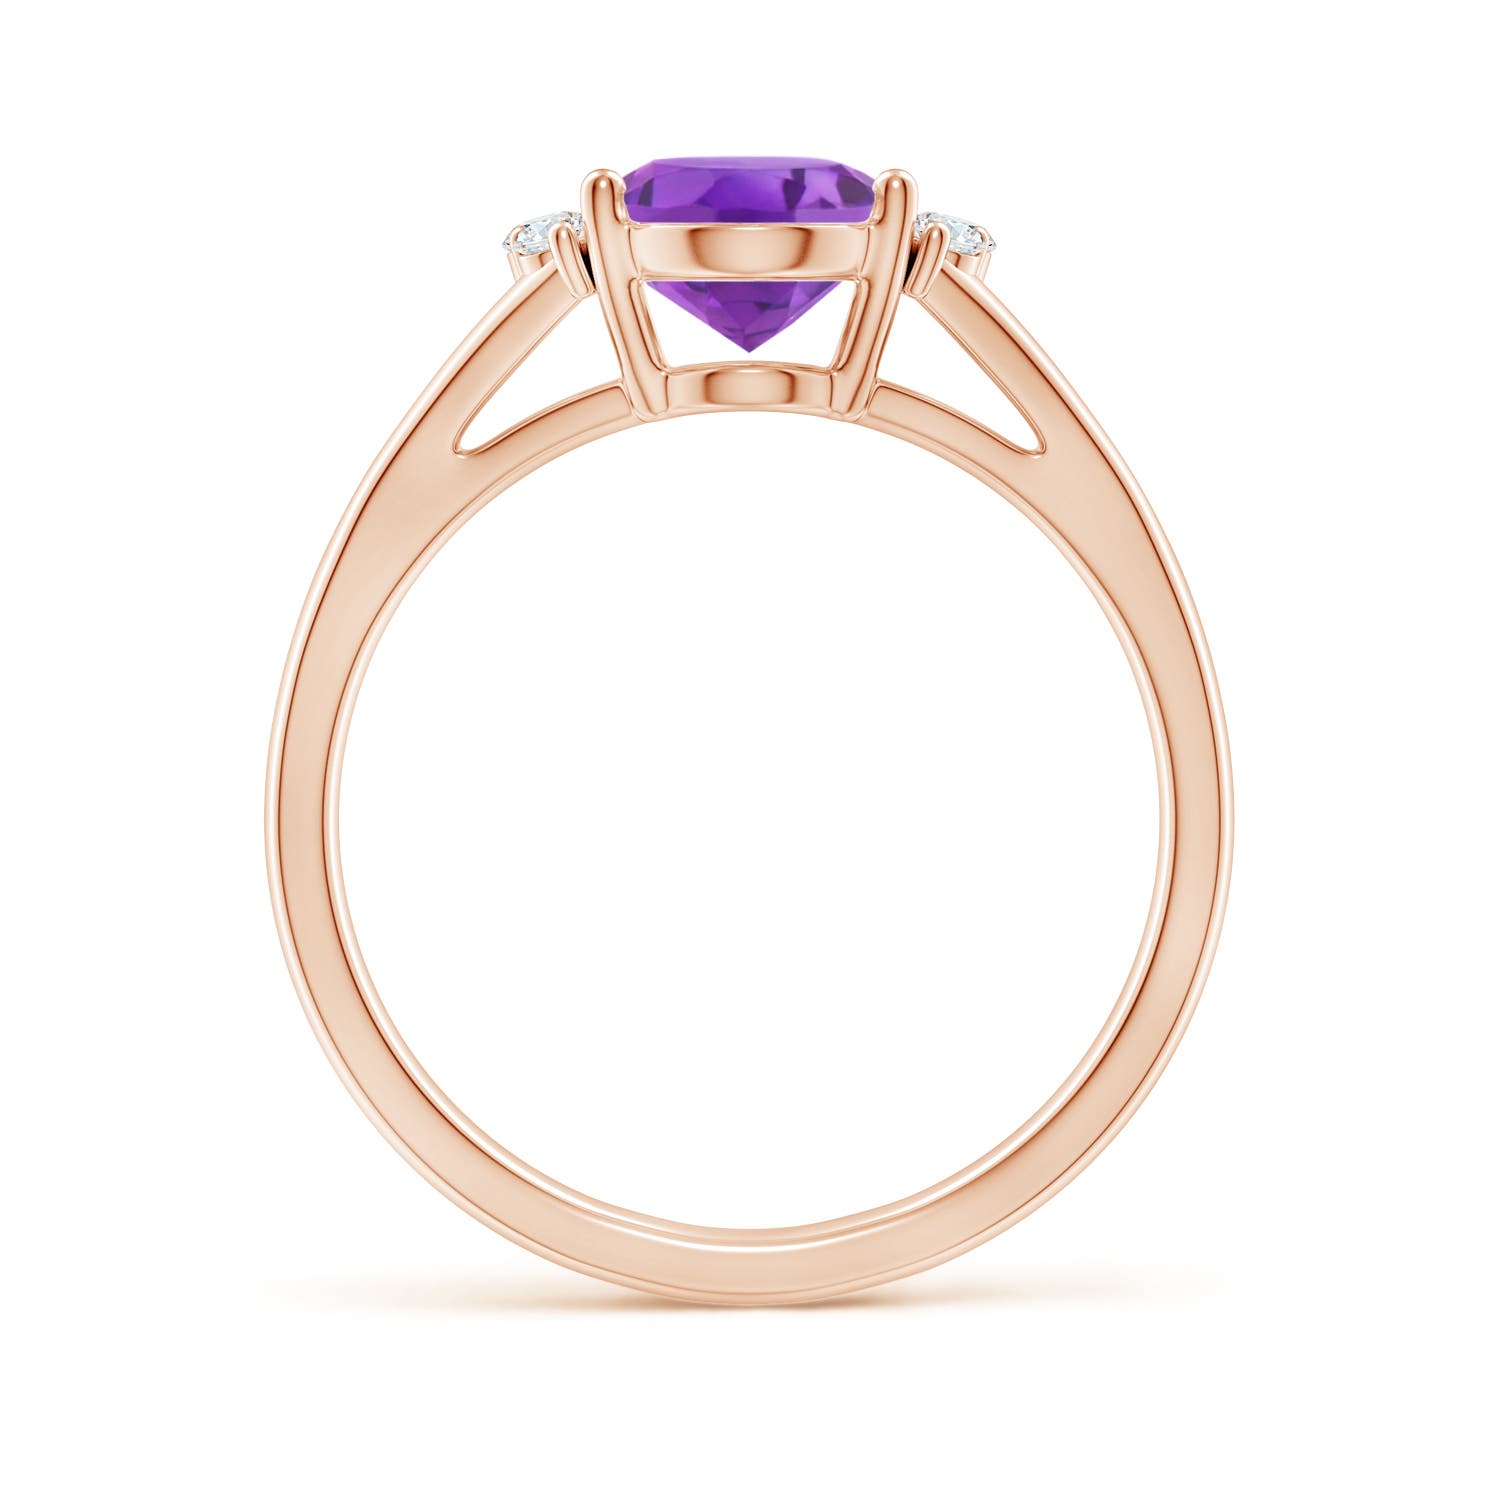 AA - Amethyst / 1.71 CT / 14 KT Rose Gold